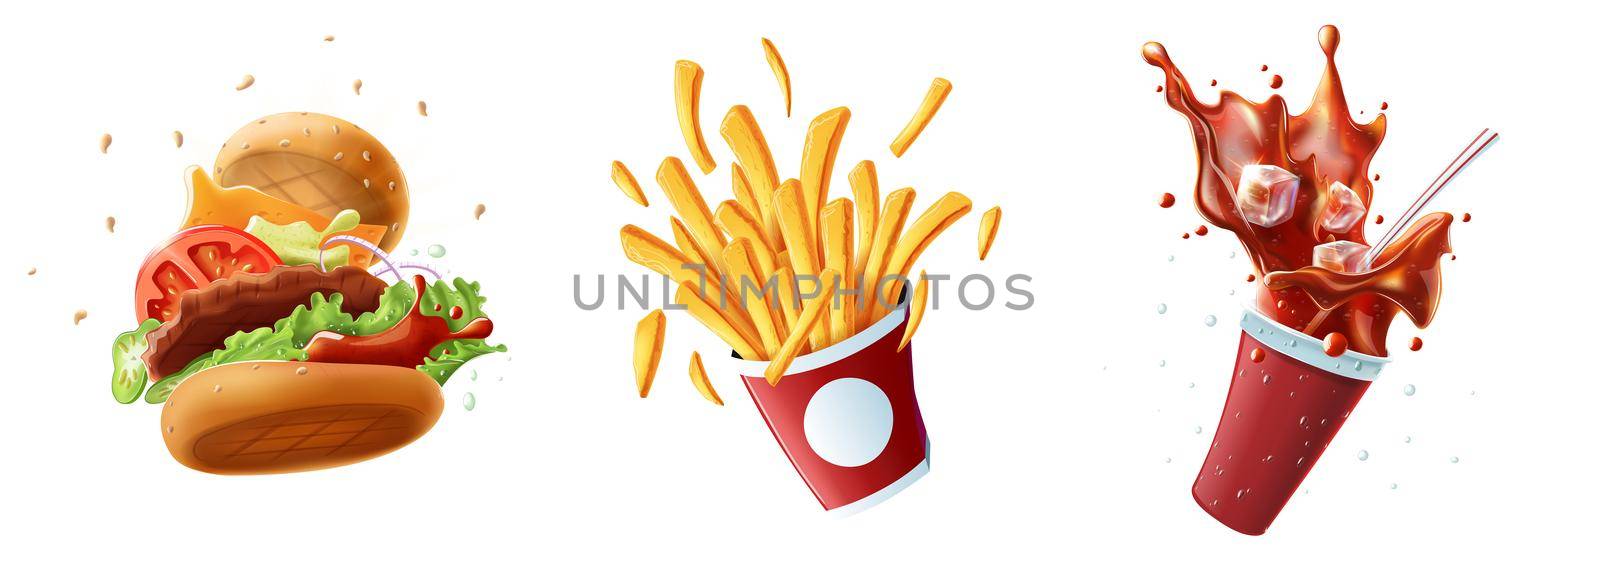 Flying fries on light blue background extra high resolution 69MP